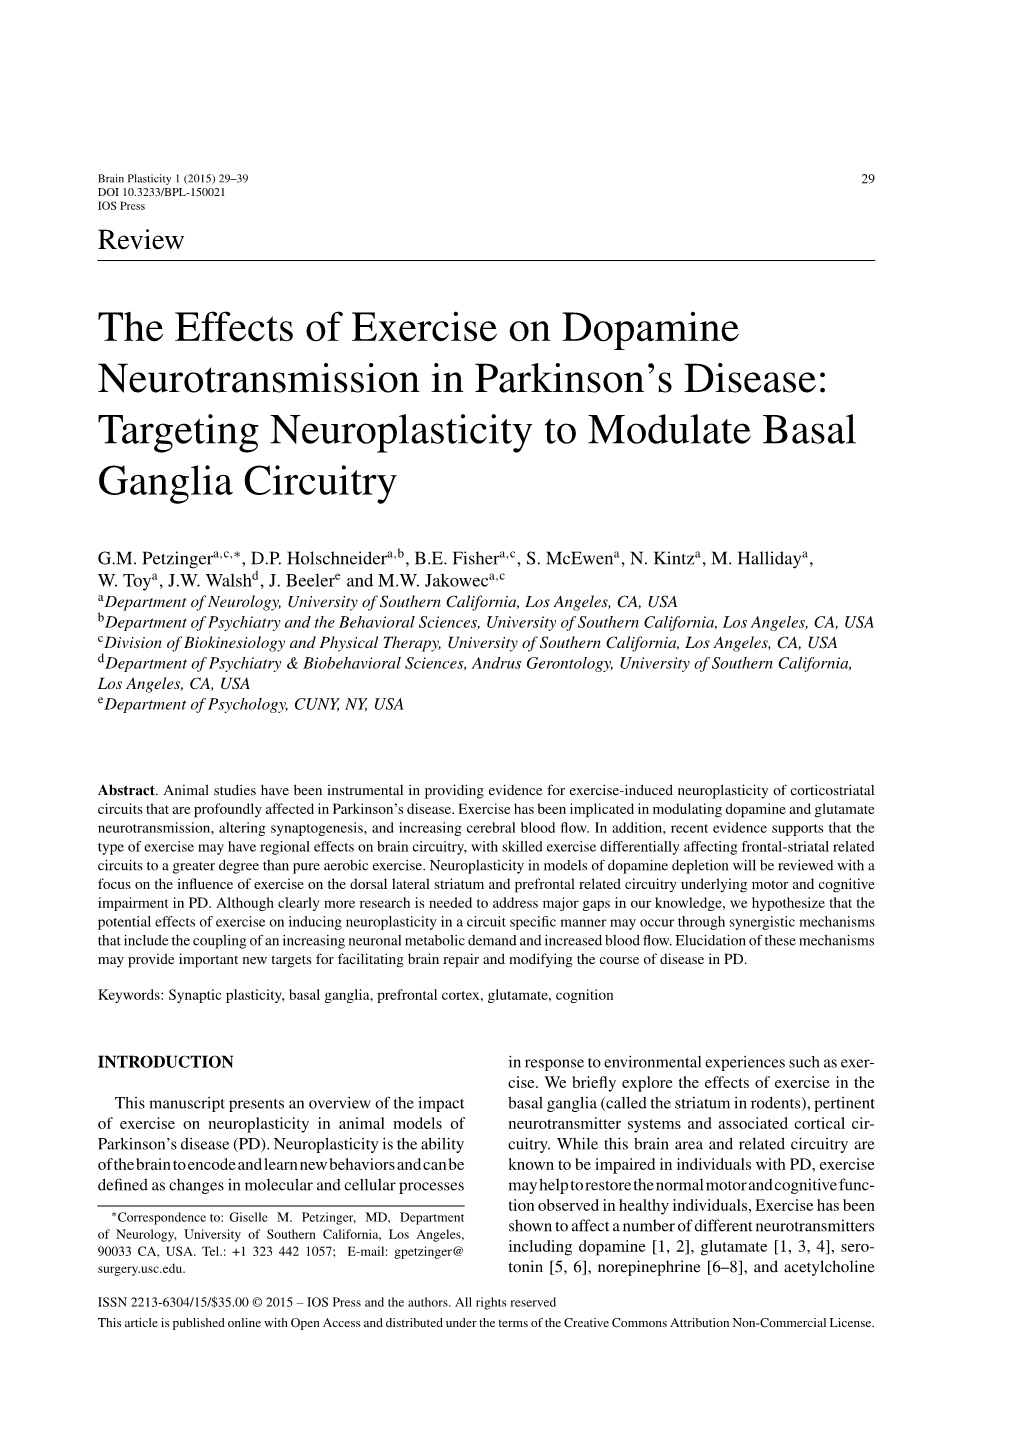 The Effects of Exercise on Dopamine Neurotransmission in Parkinson’S Disease: Targeting Neuroplasticity to Modulate Basal Ganglia Circuitry